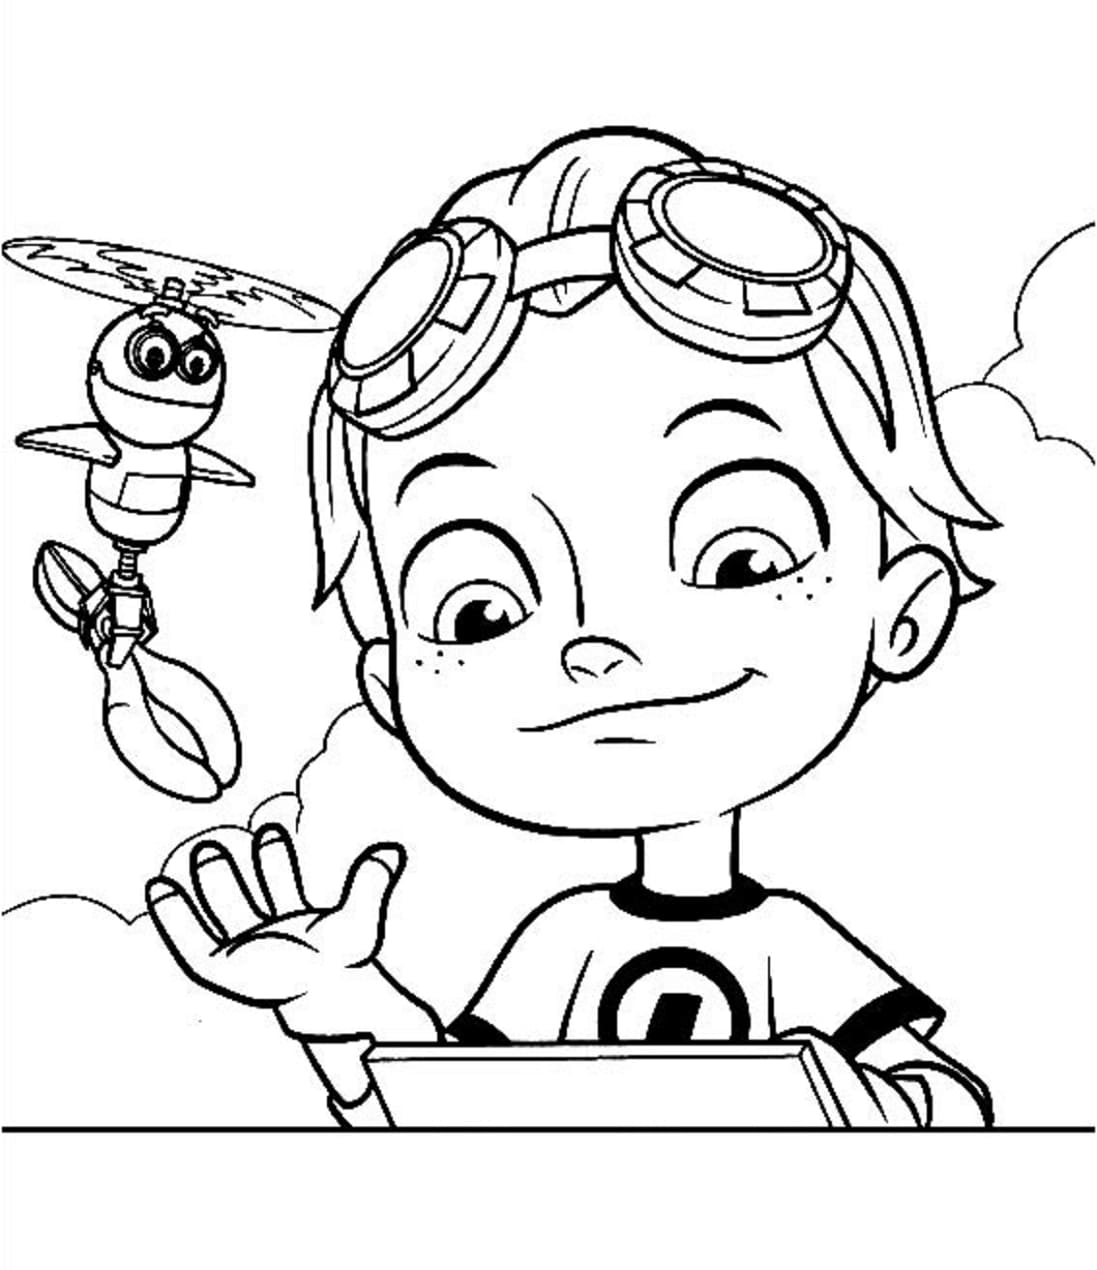 Coloriage Rusty Rivets Whirly et Rusty